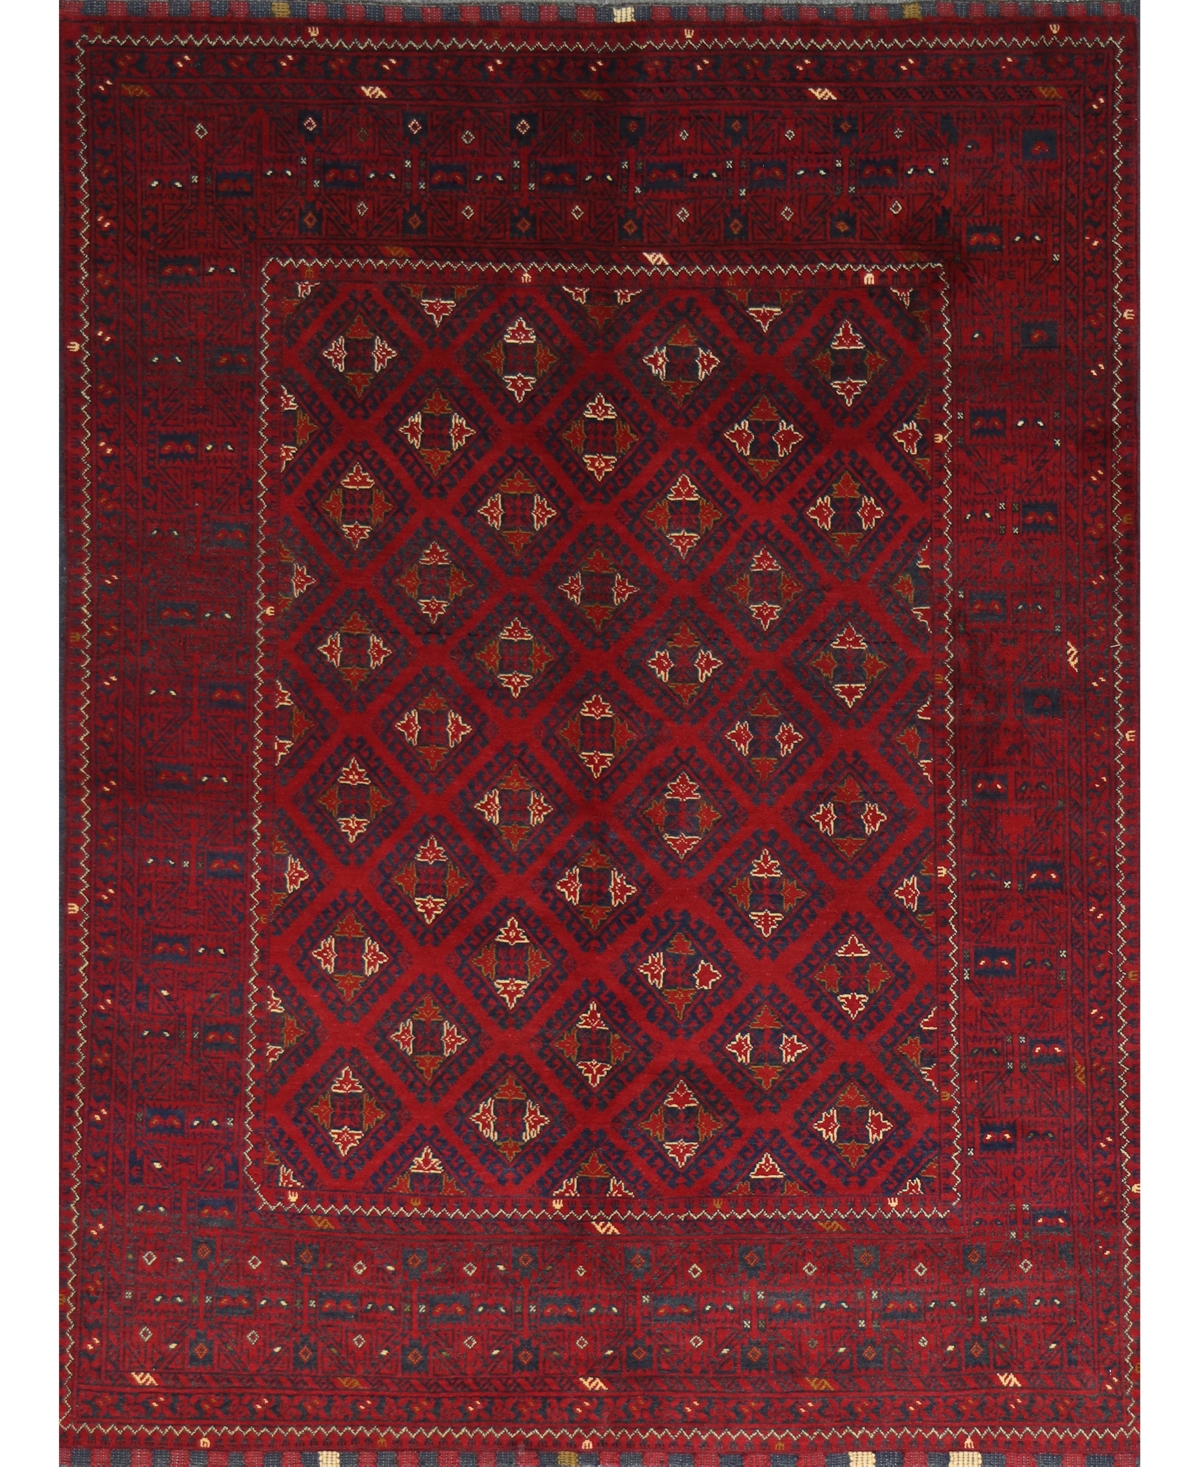 Bb Rugs One Of A Kind Fine Beshir 4'10" X 6'7" Area Rug In Red